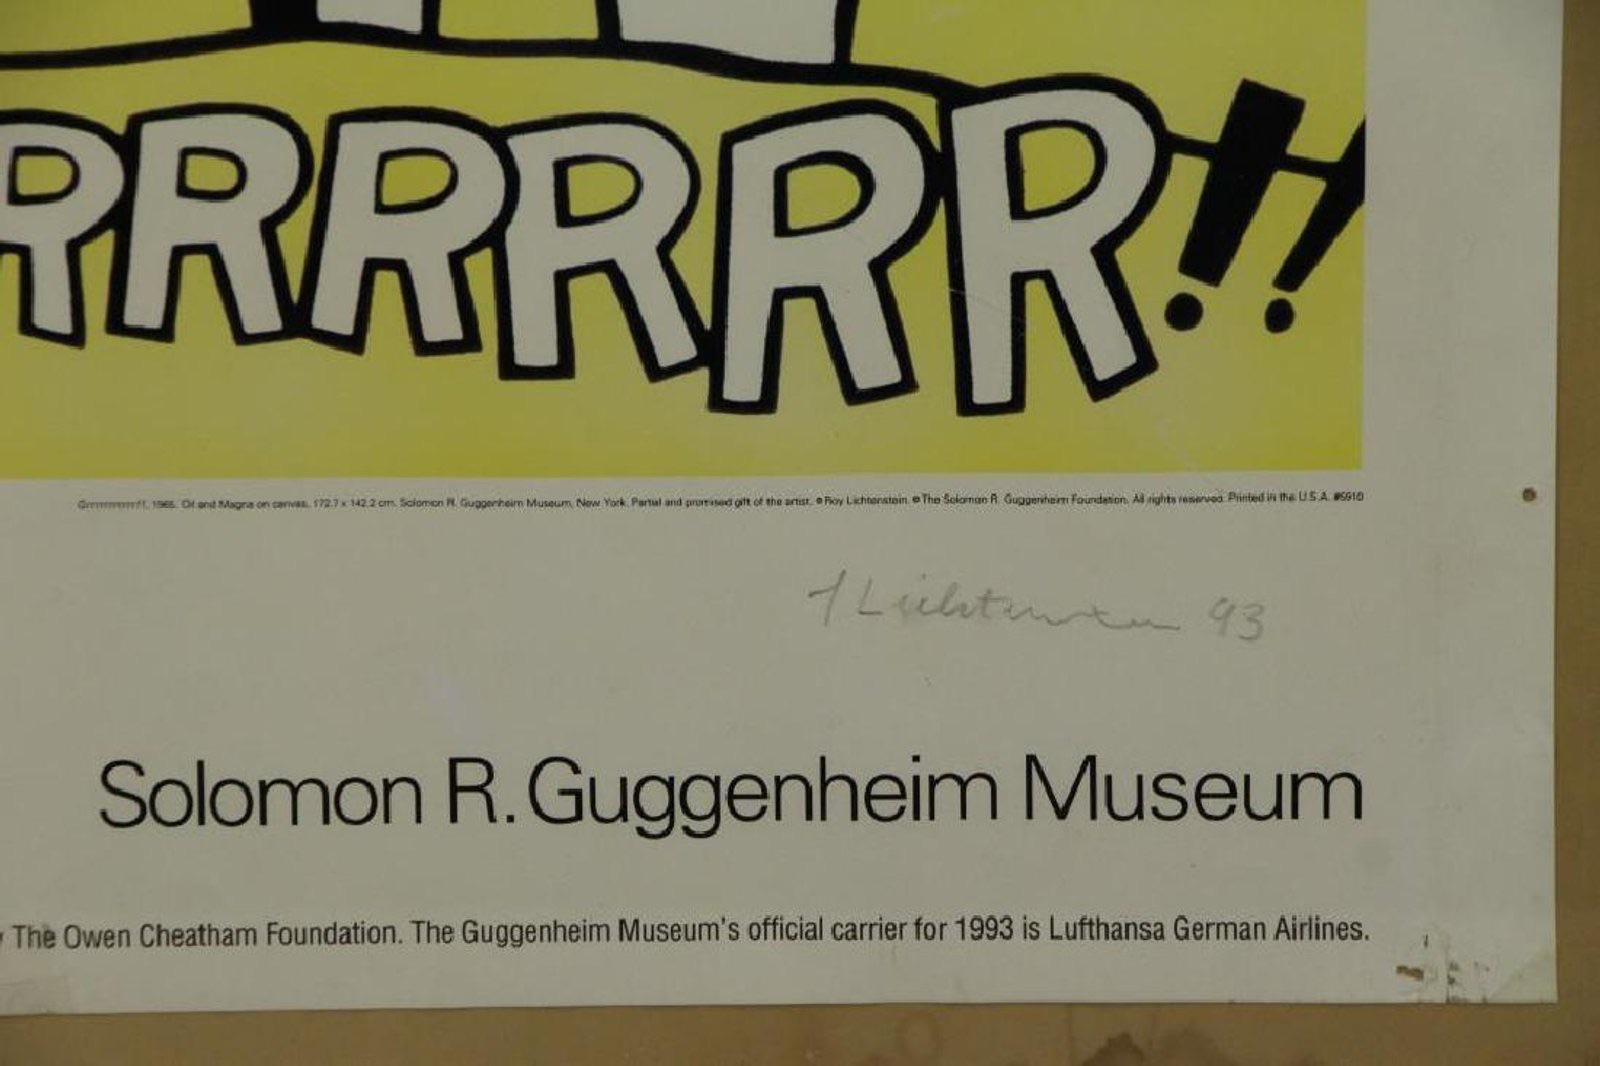 Guggenheim Museum exhibition poster 
Signed in pencil by artist on lower right. 

Grrrrrrrrrrr!! is a 1965 oil and Magna on canvas painting by Roy Lichtenstein. Measuring 68 in × 56.125 in (172.7 cm × 142.6 cm), it was bequeathed to the Solomon R.